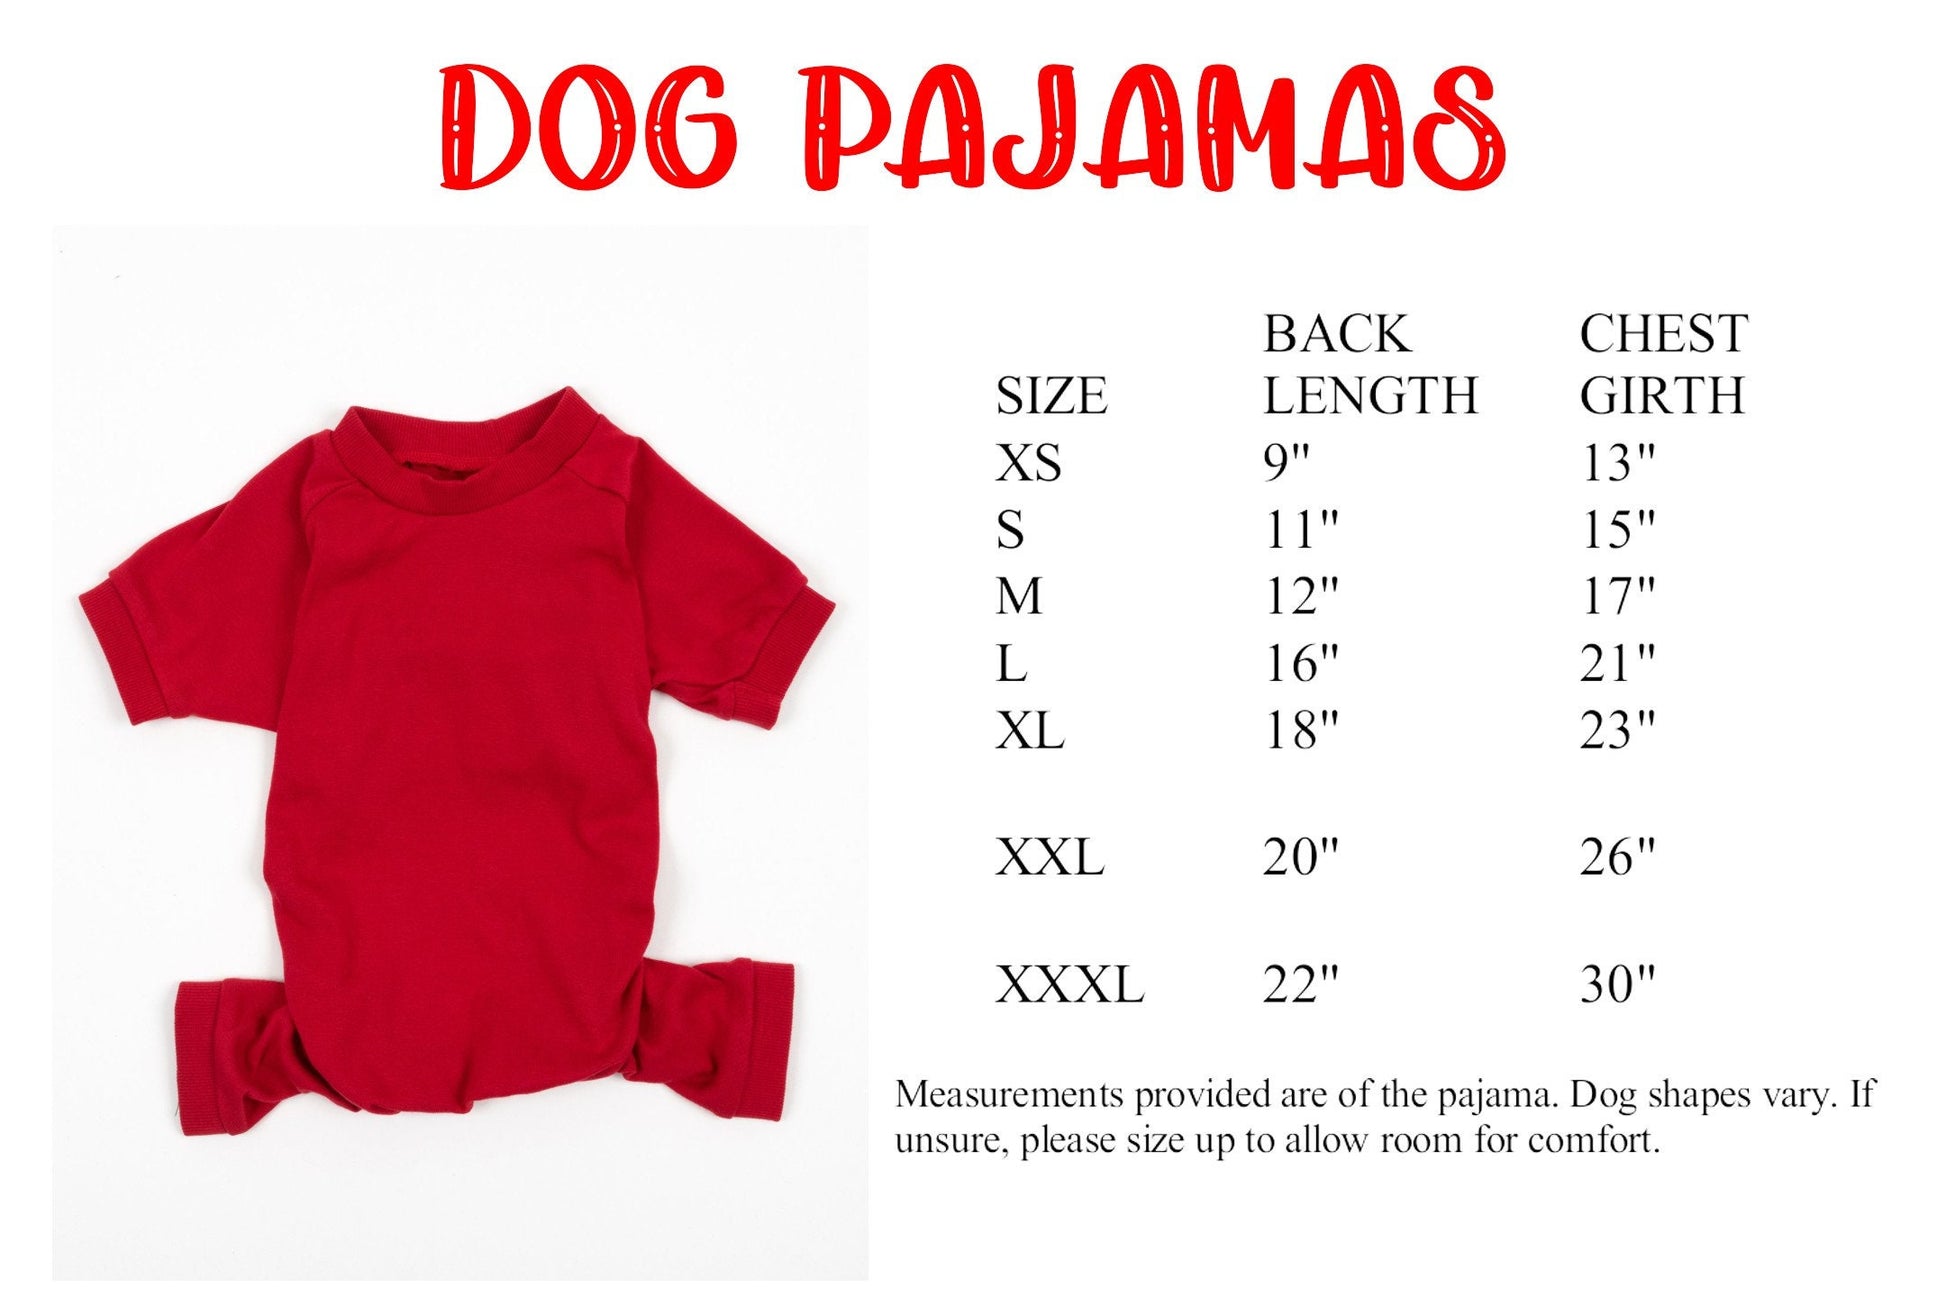 I Wheelie Like You Red Striped Pajamas, mommy and me pjs, valentines pajamas for the family, dog pajamas, family pajamas, valentines day